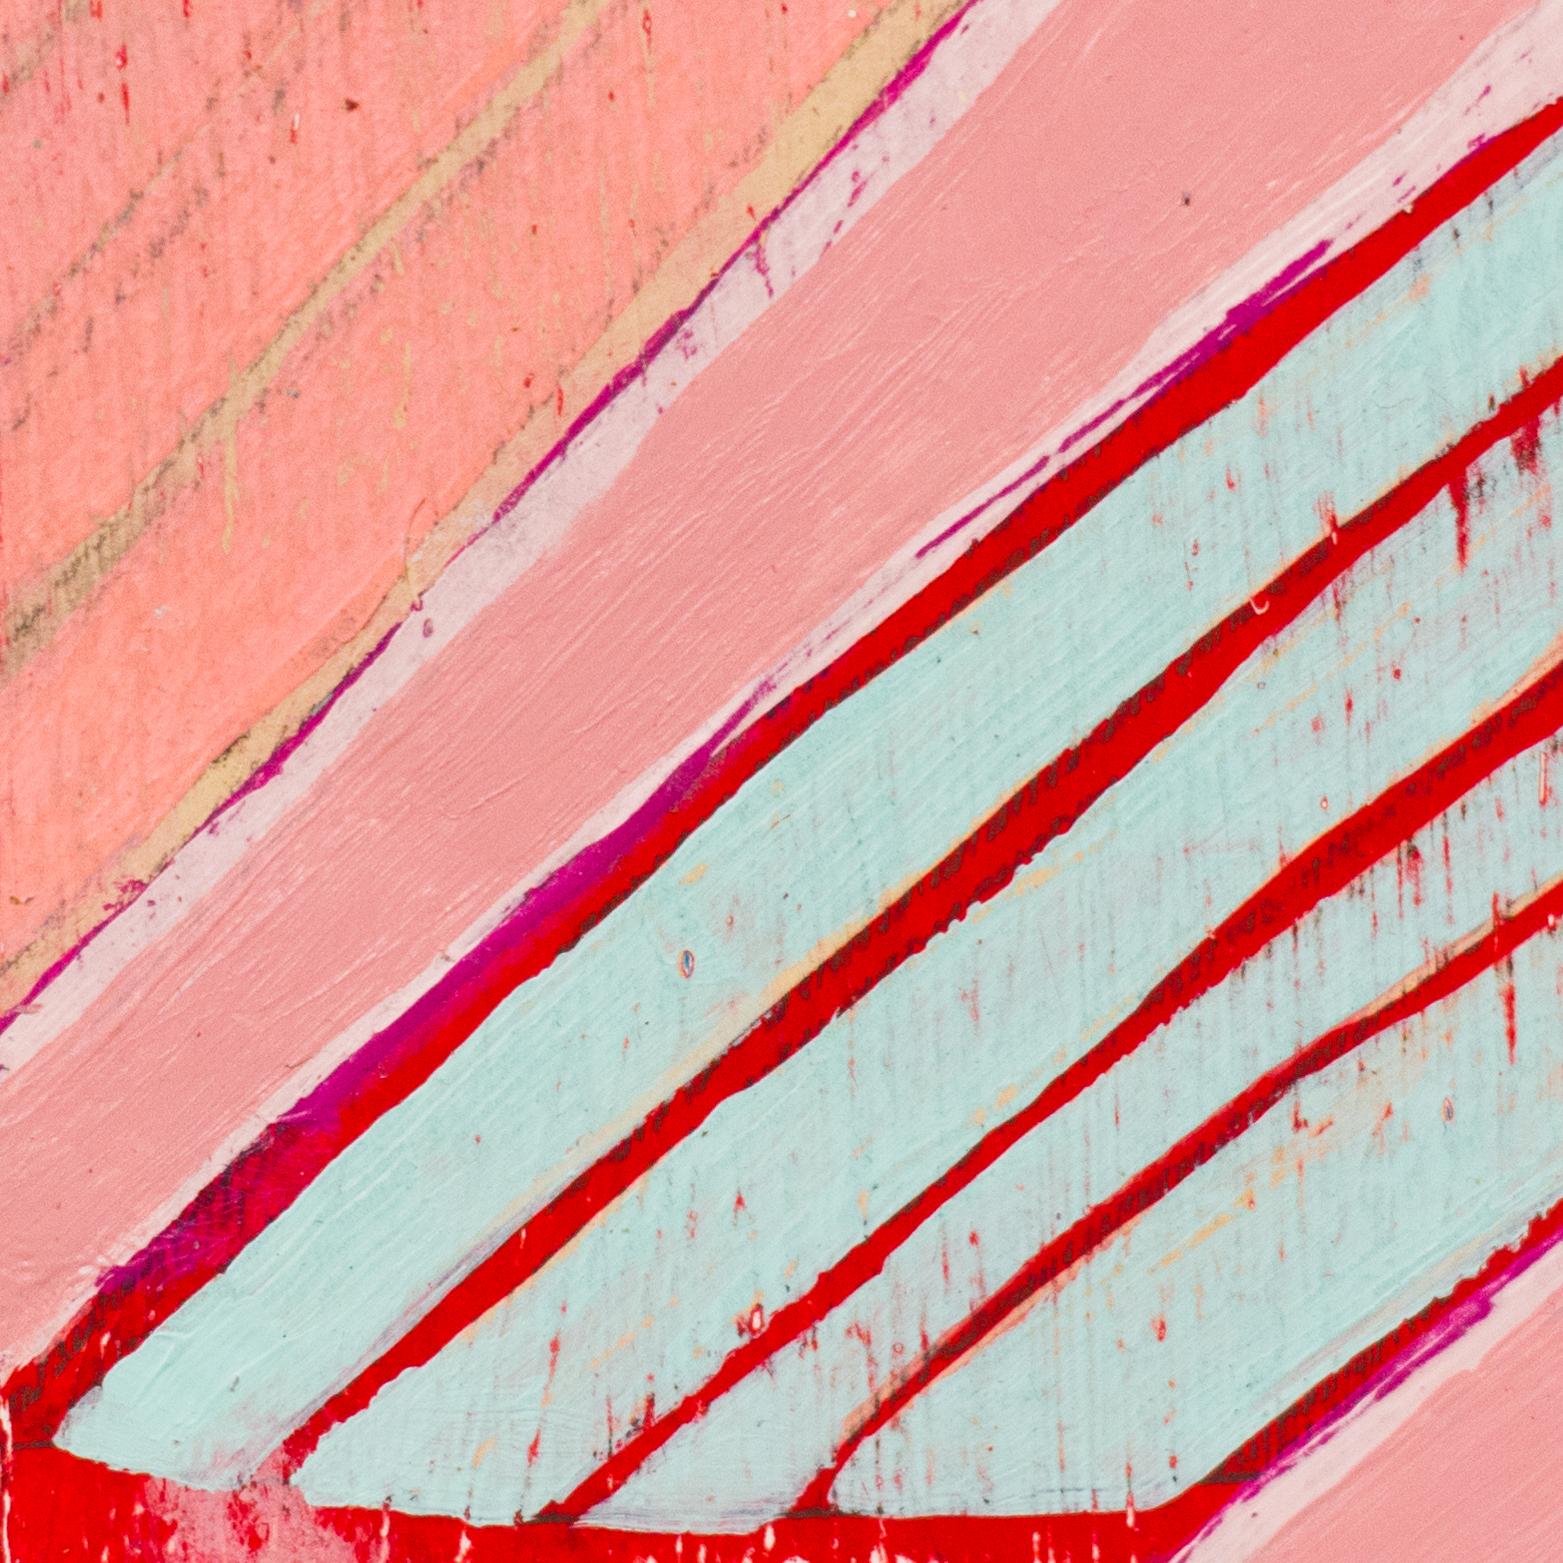 August 28th, 2016 - Pink Abstract Painting by Marcie Paper